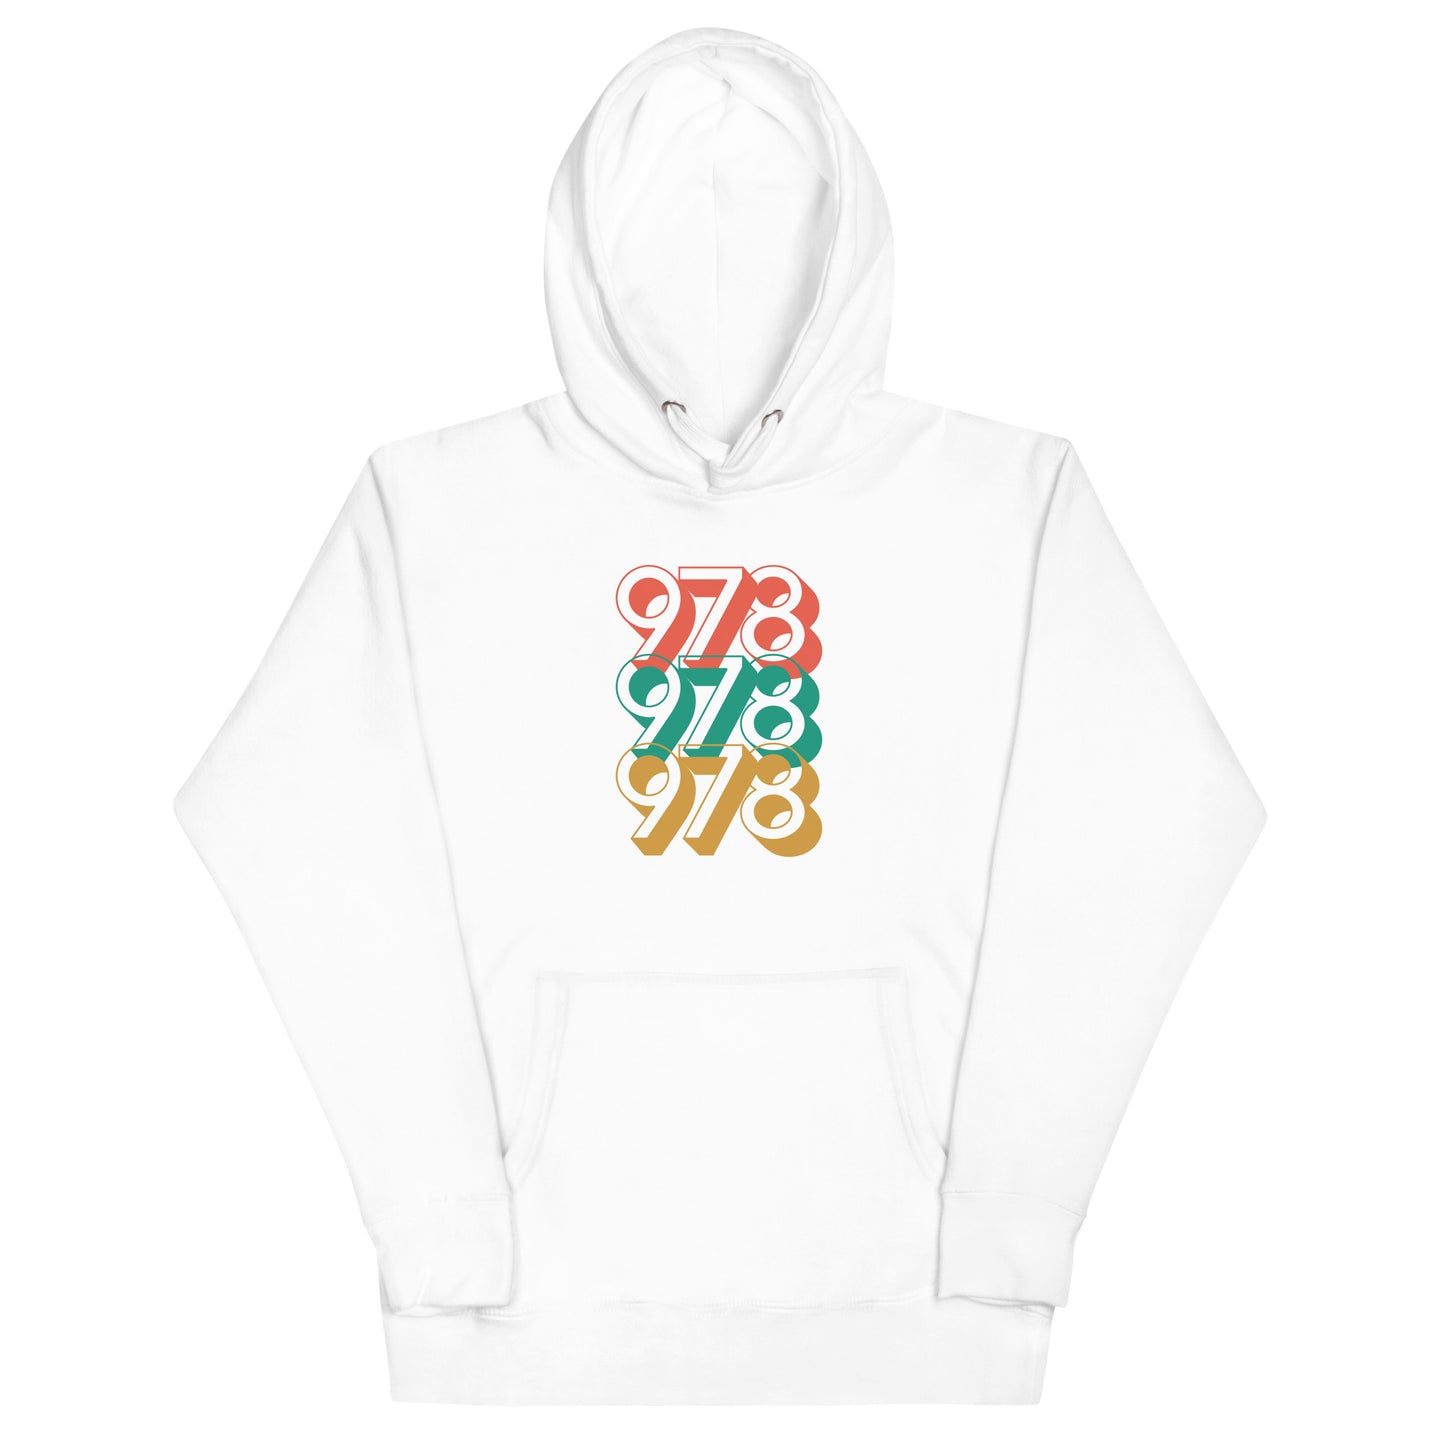 white hoodie with three 978s in red green and yellow